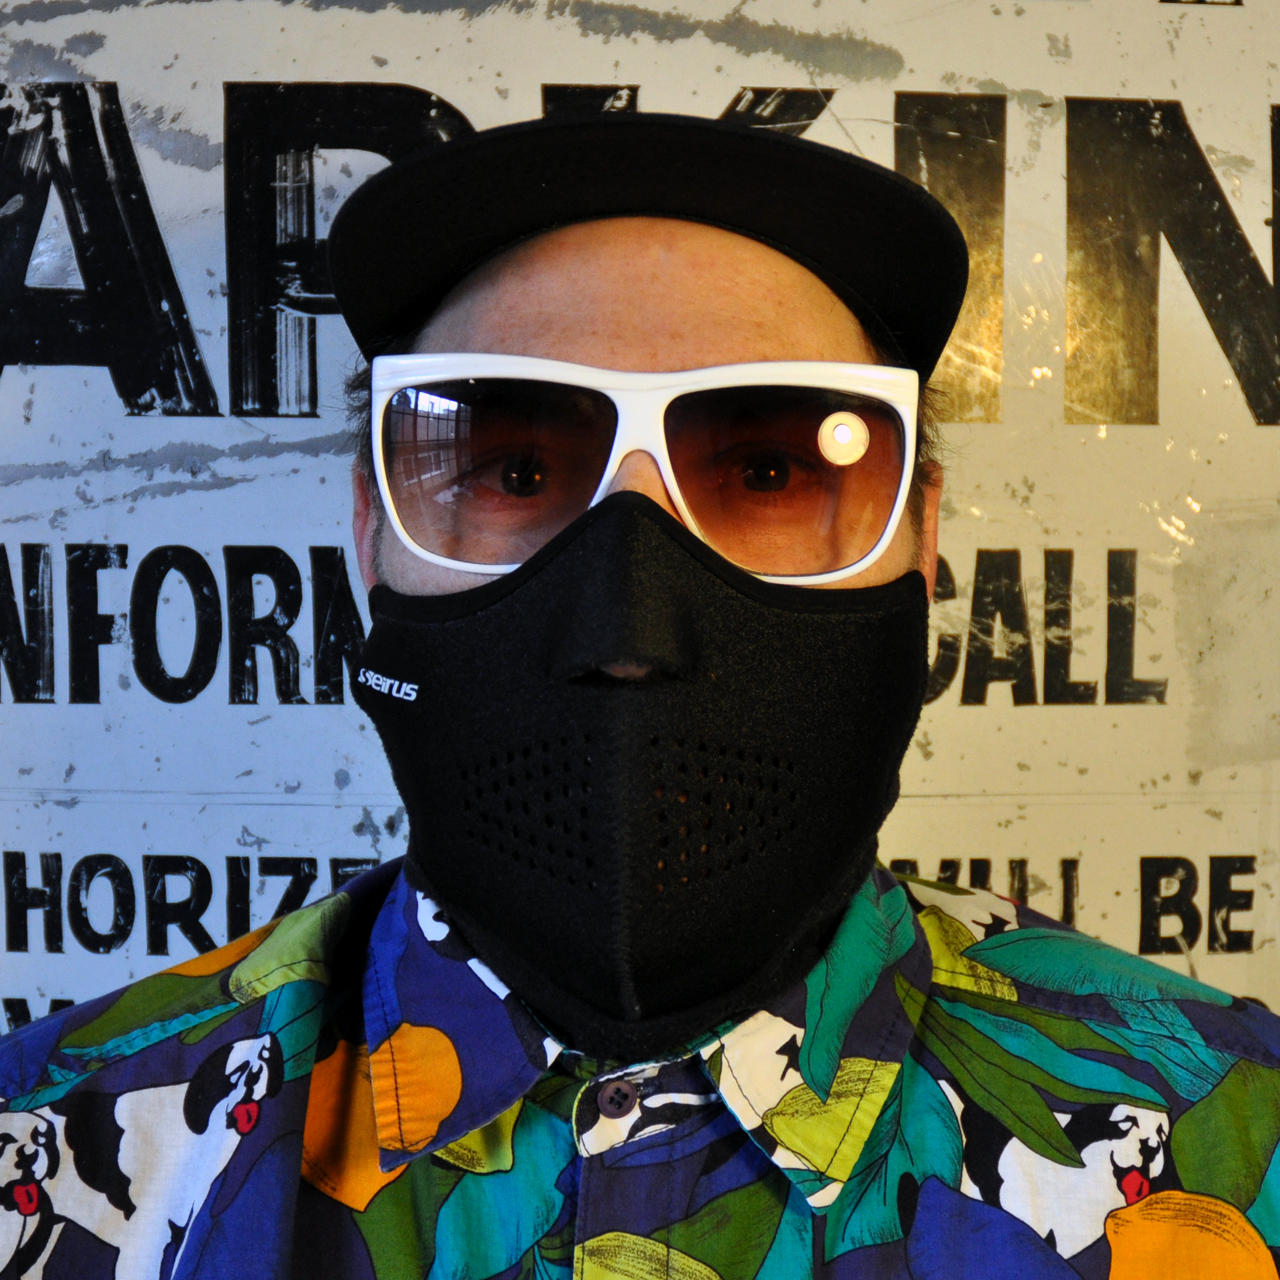 Man wearing black mask with white sunglasses and colorful shirt. Background has painted letters.